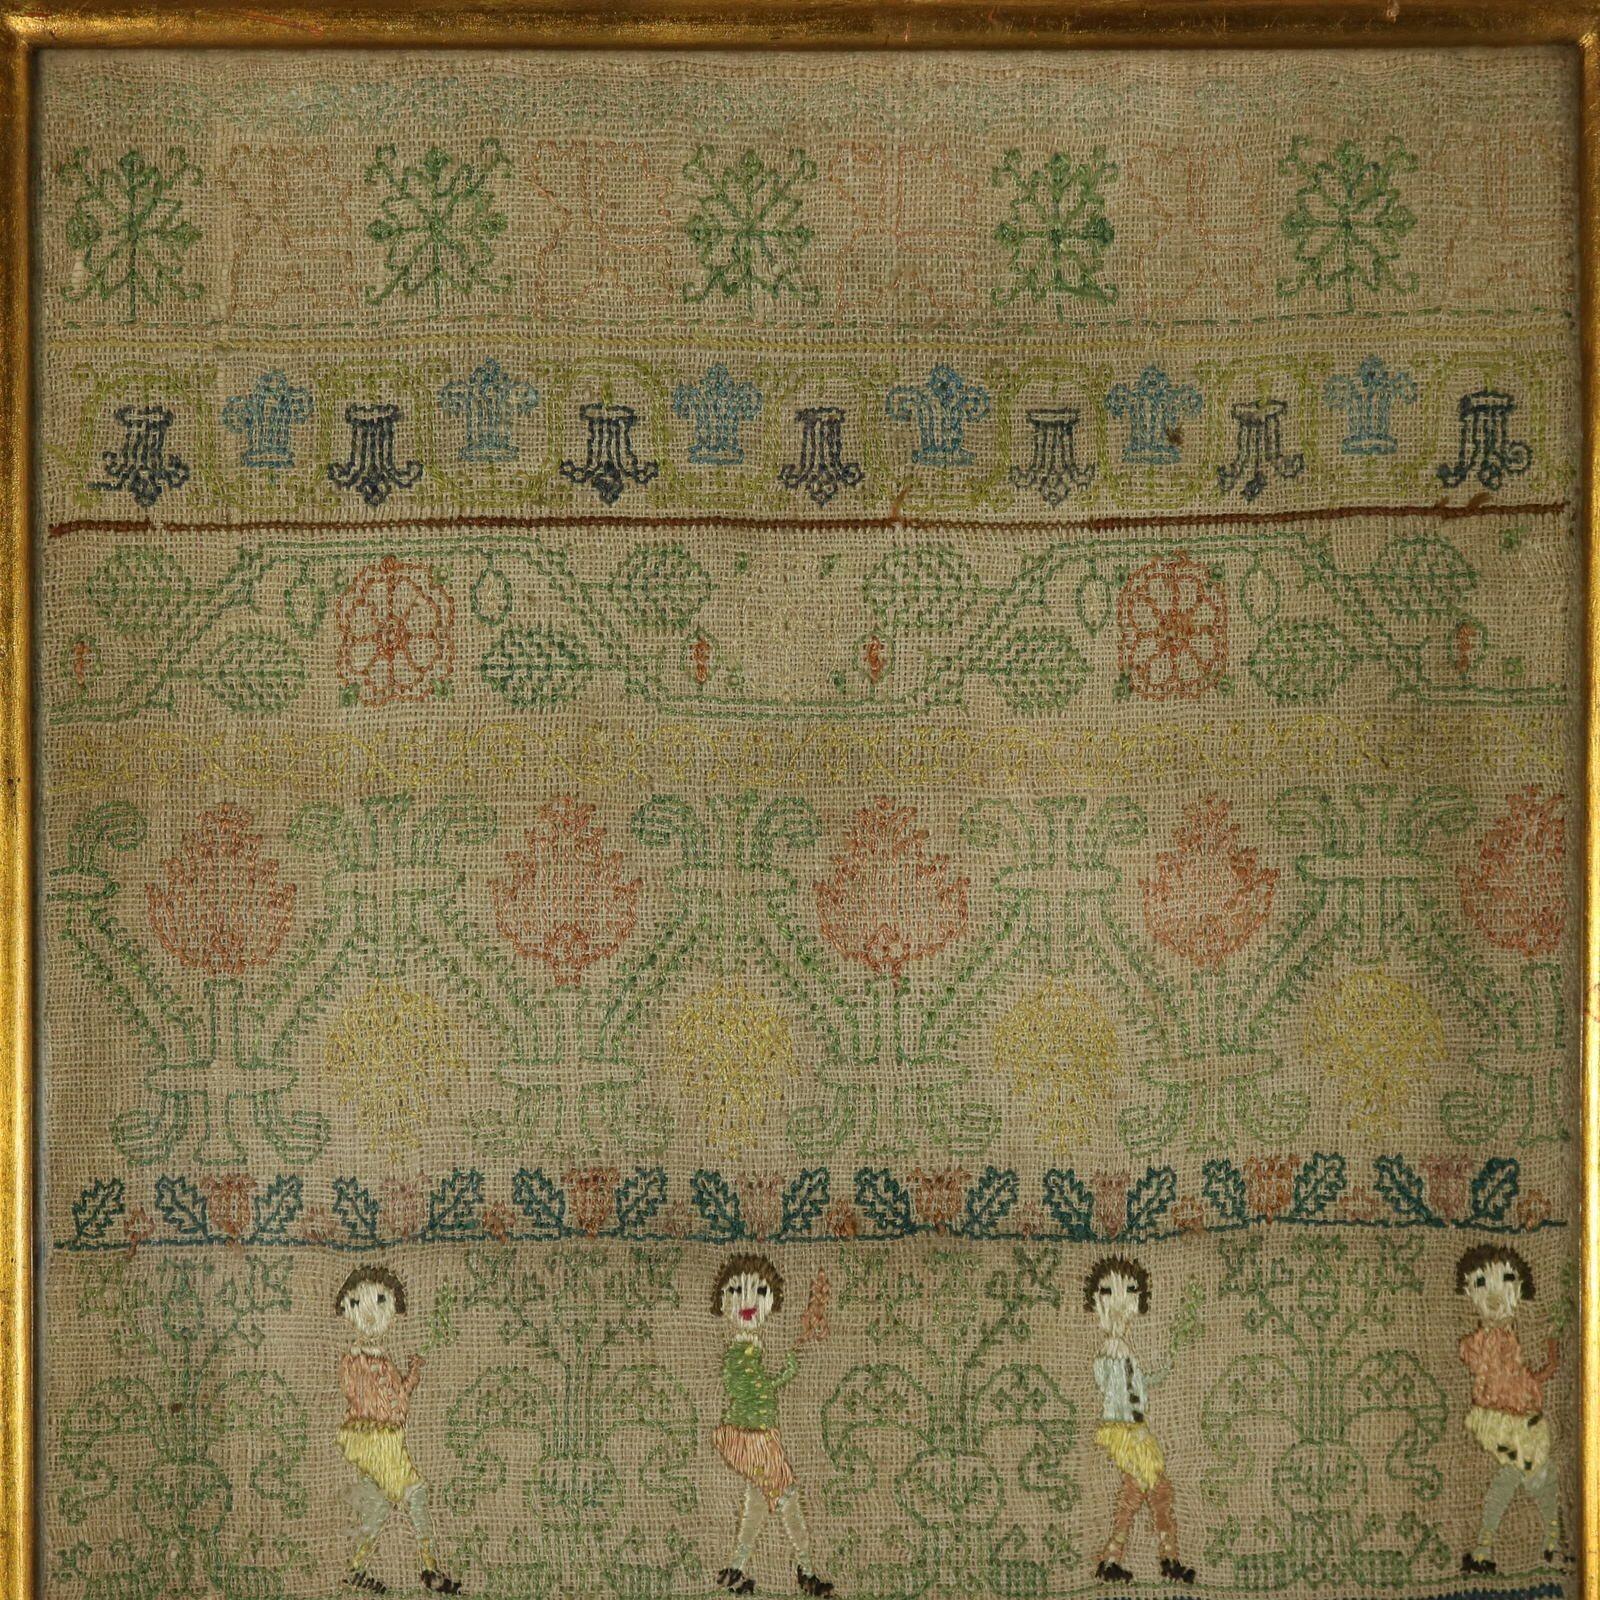 1741 Georgian Band Sampler by Martha Hayter. The sampler is worked in silk on canvas ground, in a variety of stitches. Geometric bands in various patterns. Colours green, blue, yellow, silver, brown and black. Family initials, 'IH, MH, EH, EC, GB,